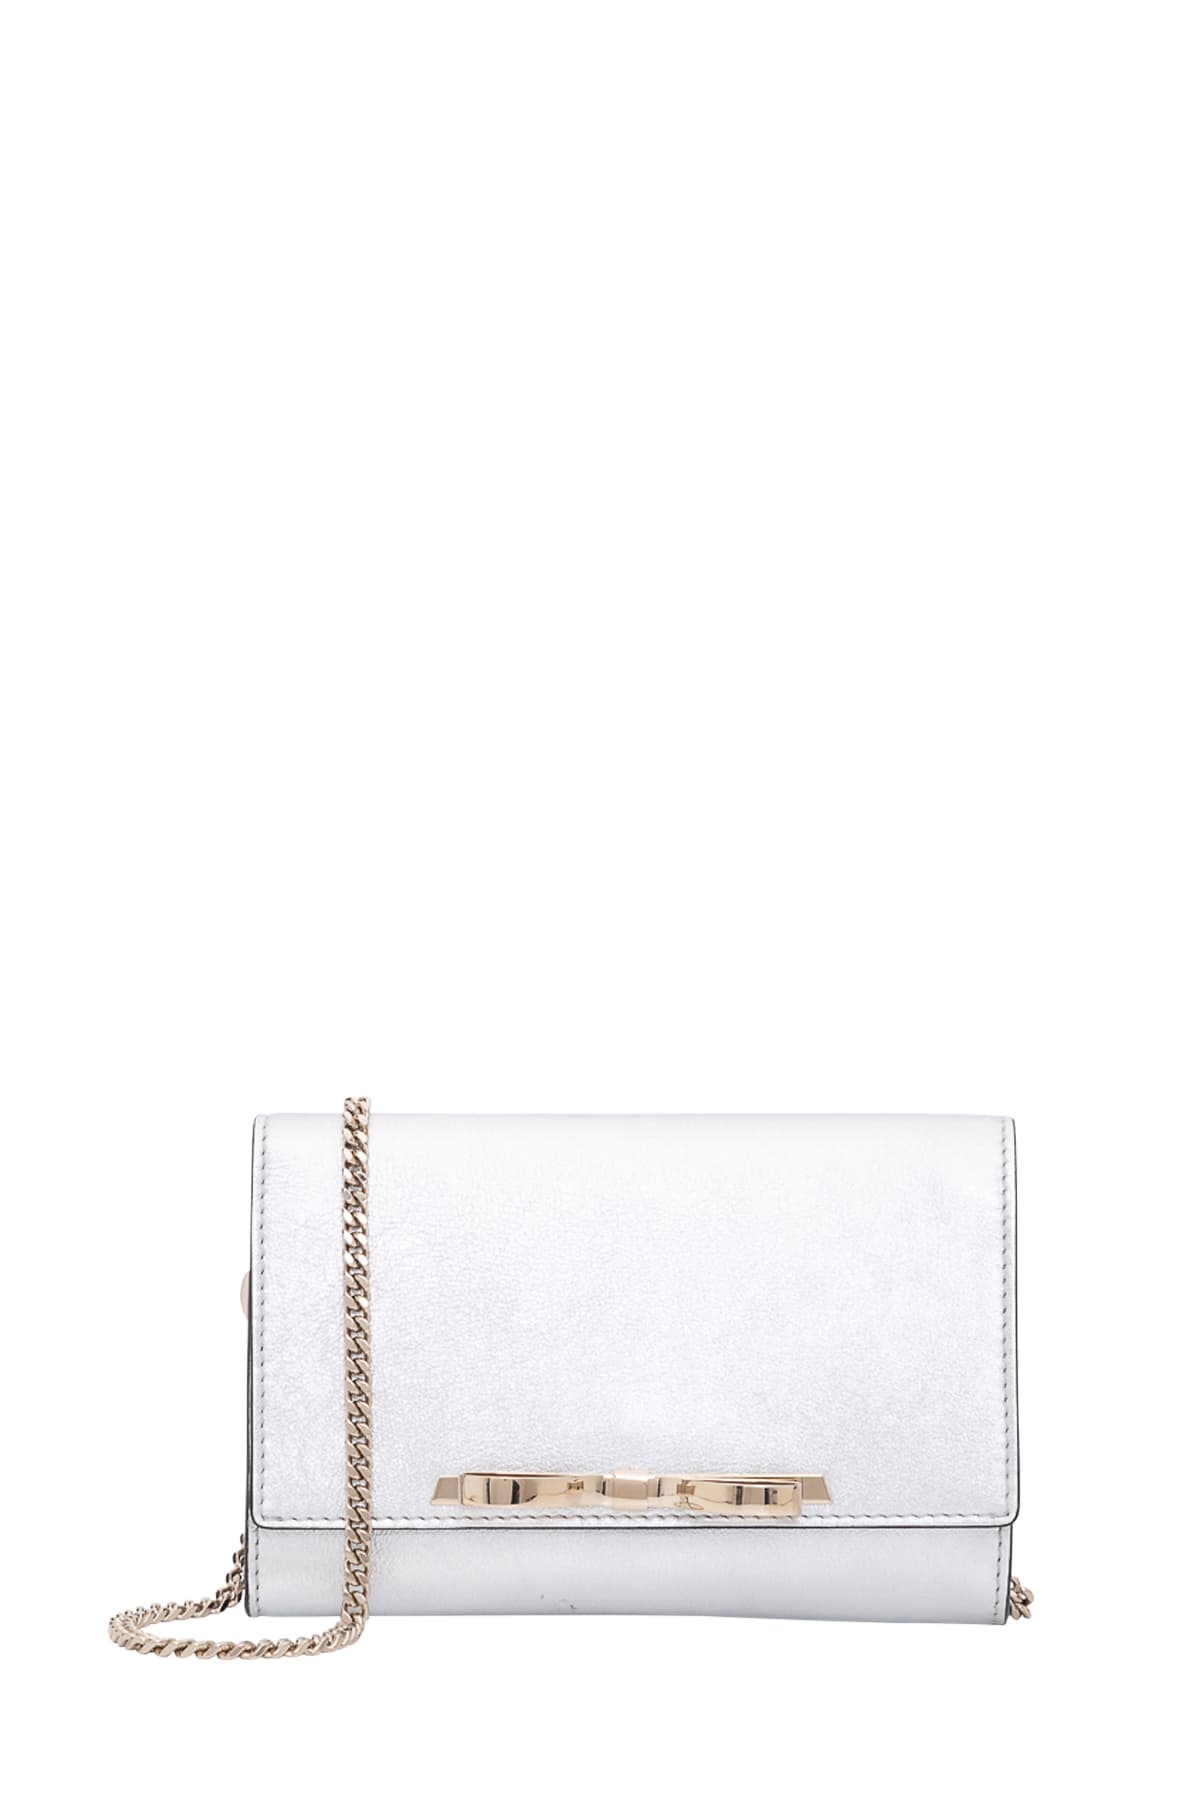 RED VALENTINO CLUTCH WITH CHAIN STRAP,11243905